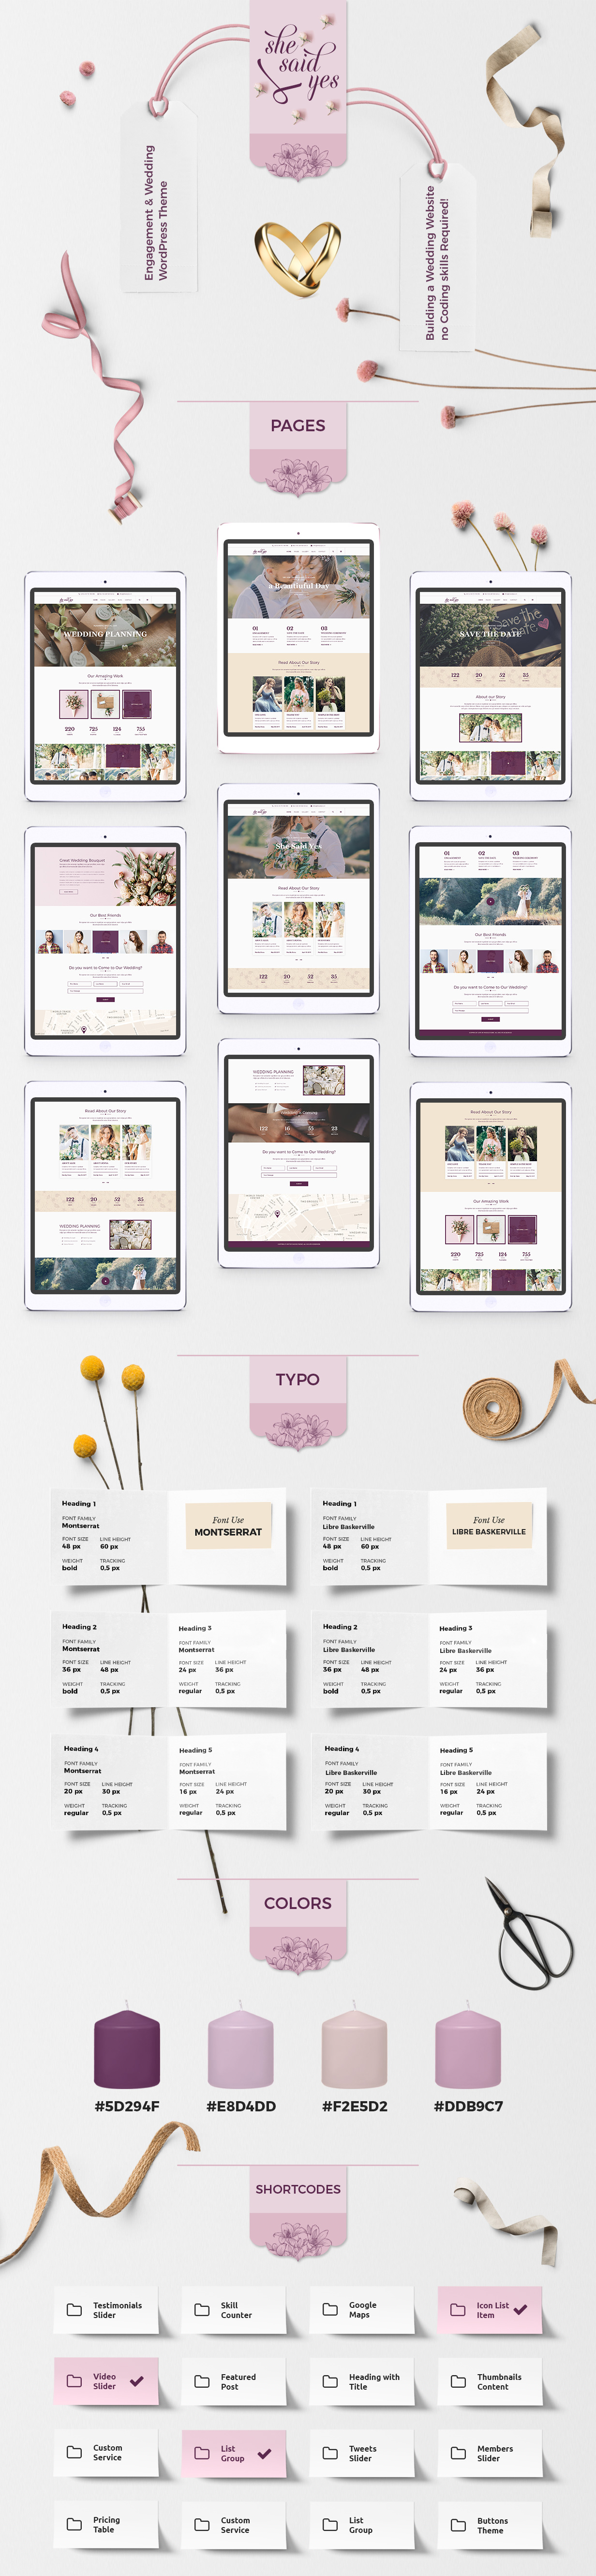 Awesome pages on site template with purple inserts.